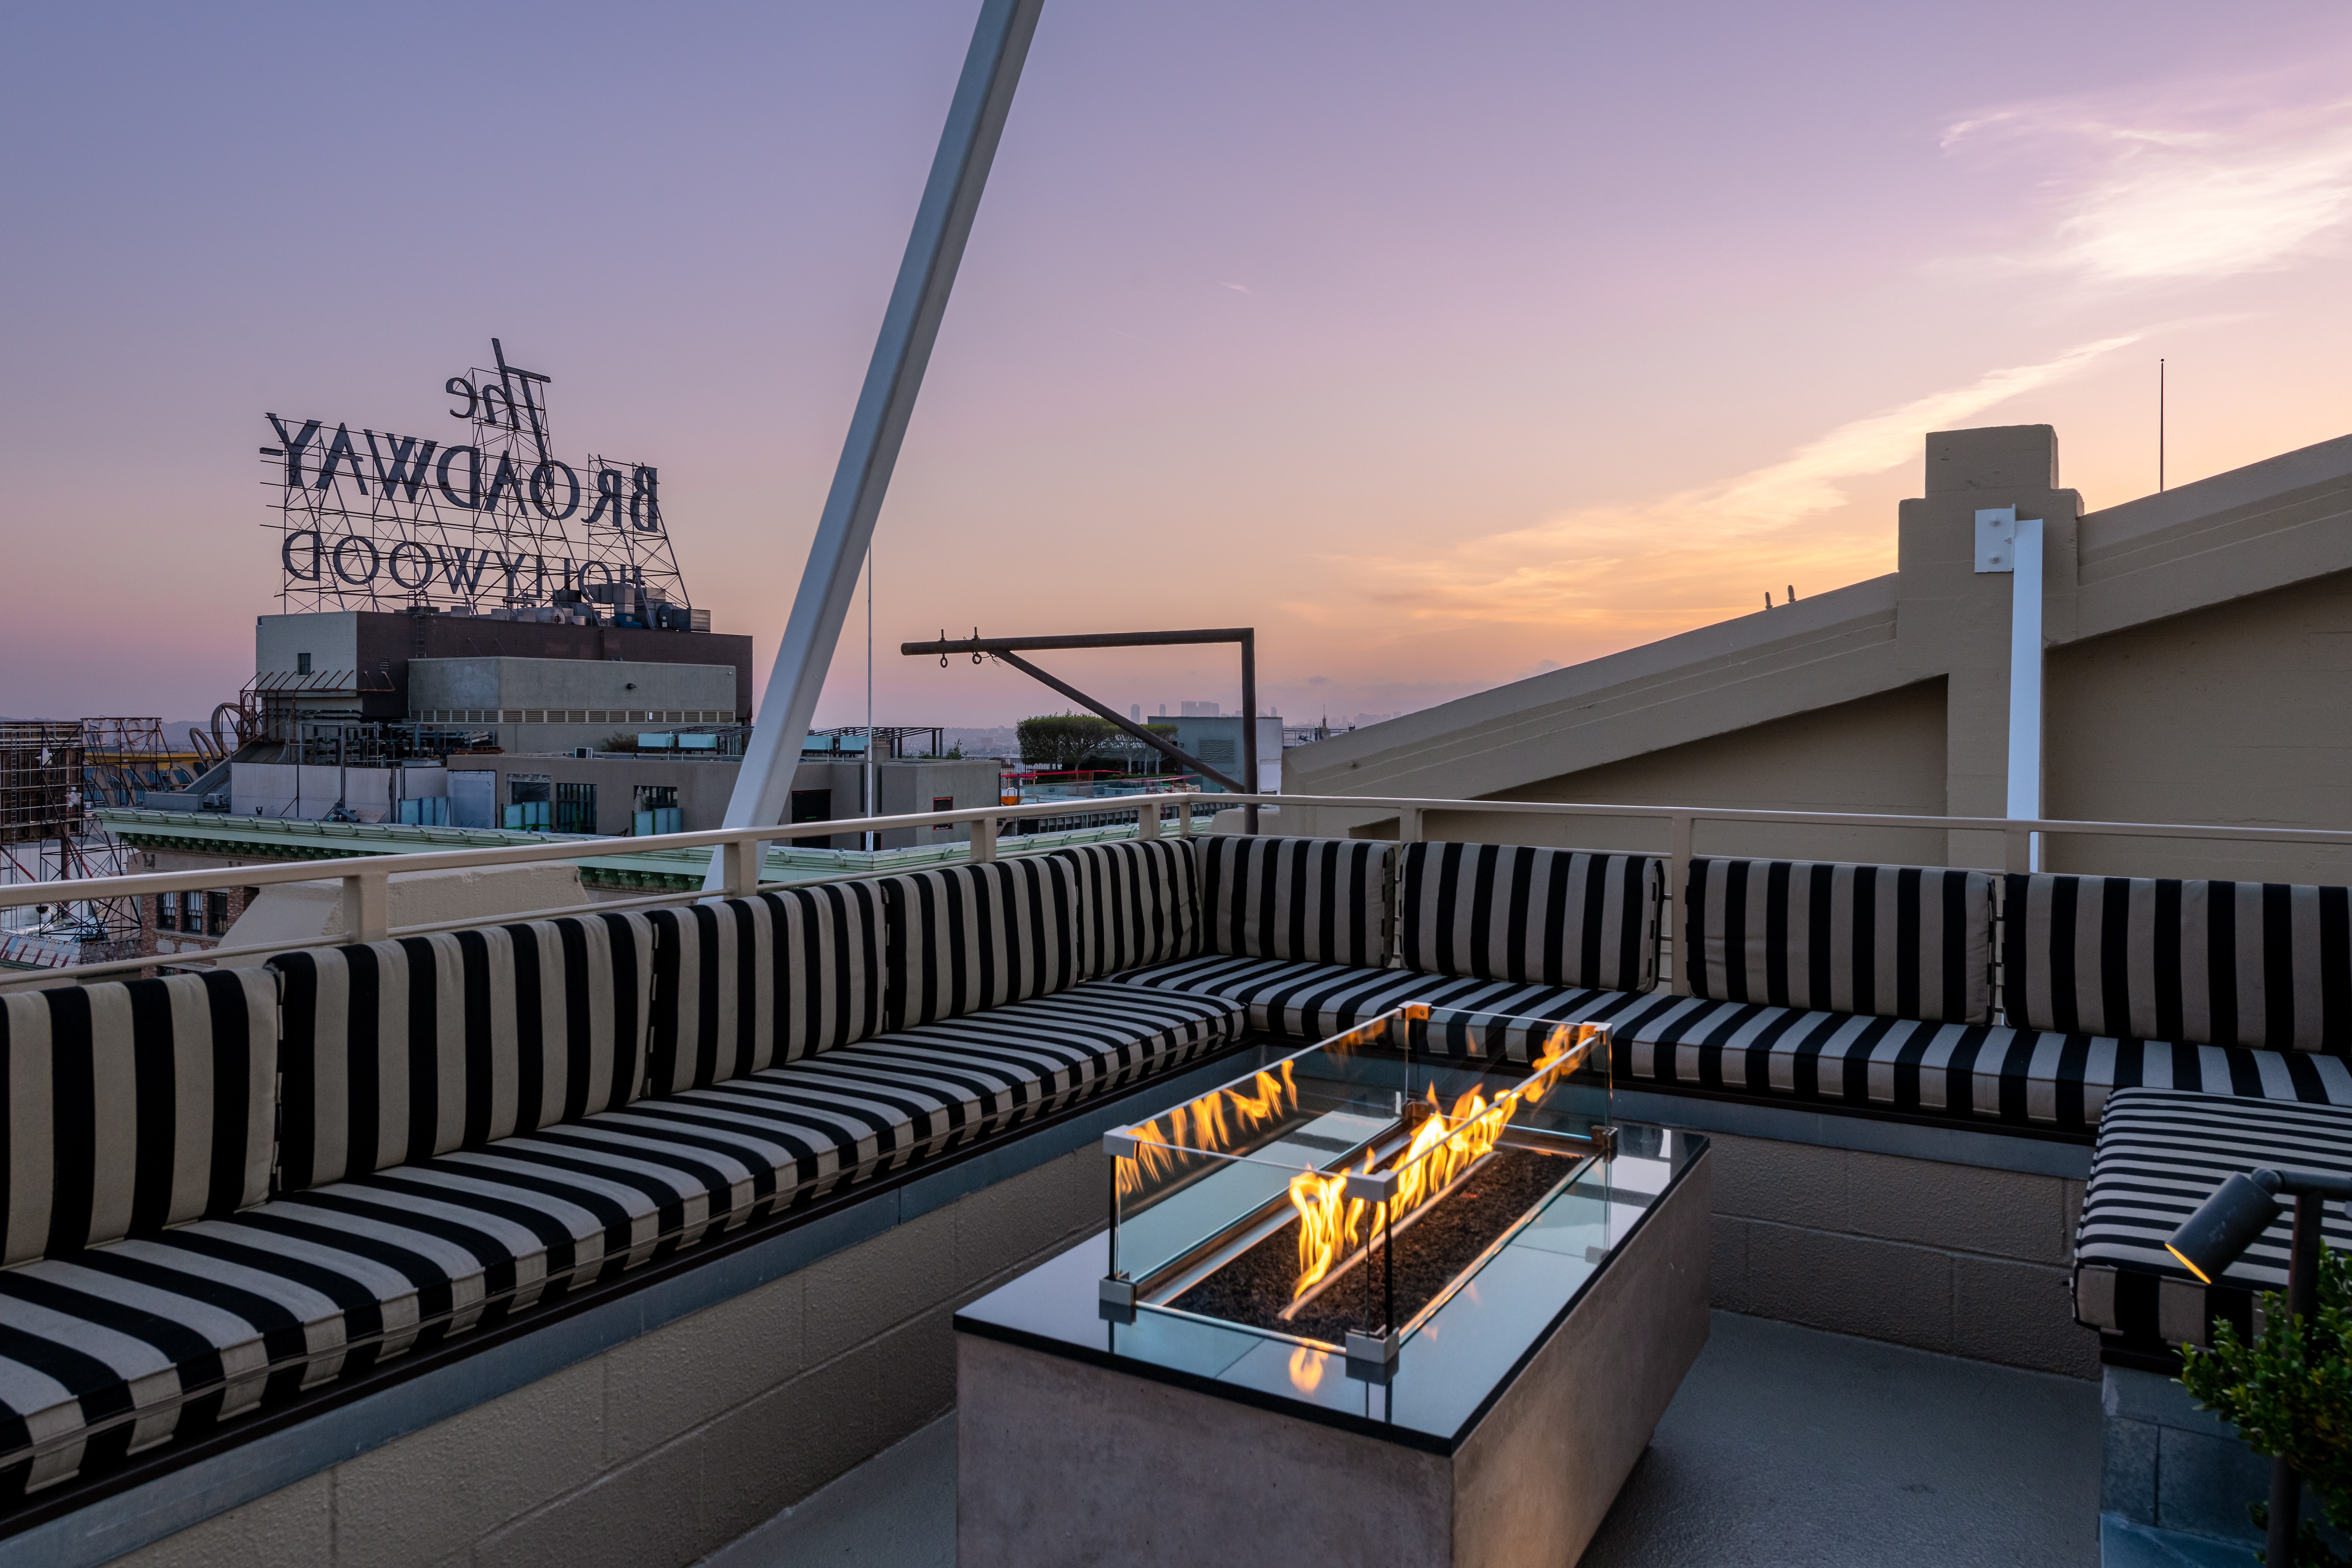 Historic Lofts at Hollywood. Cozy seating and firepits to enjoy breathtaking city views from this magnificent roof top patio area.